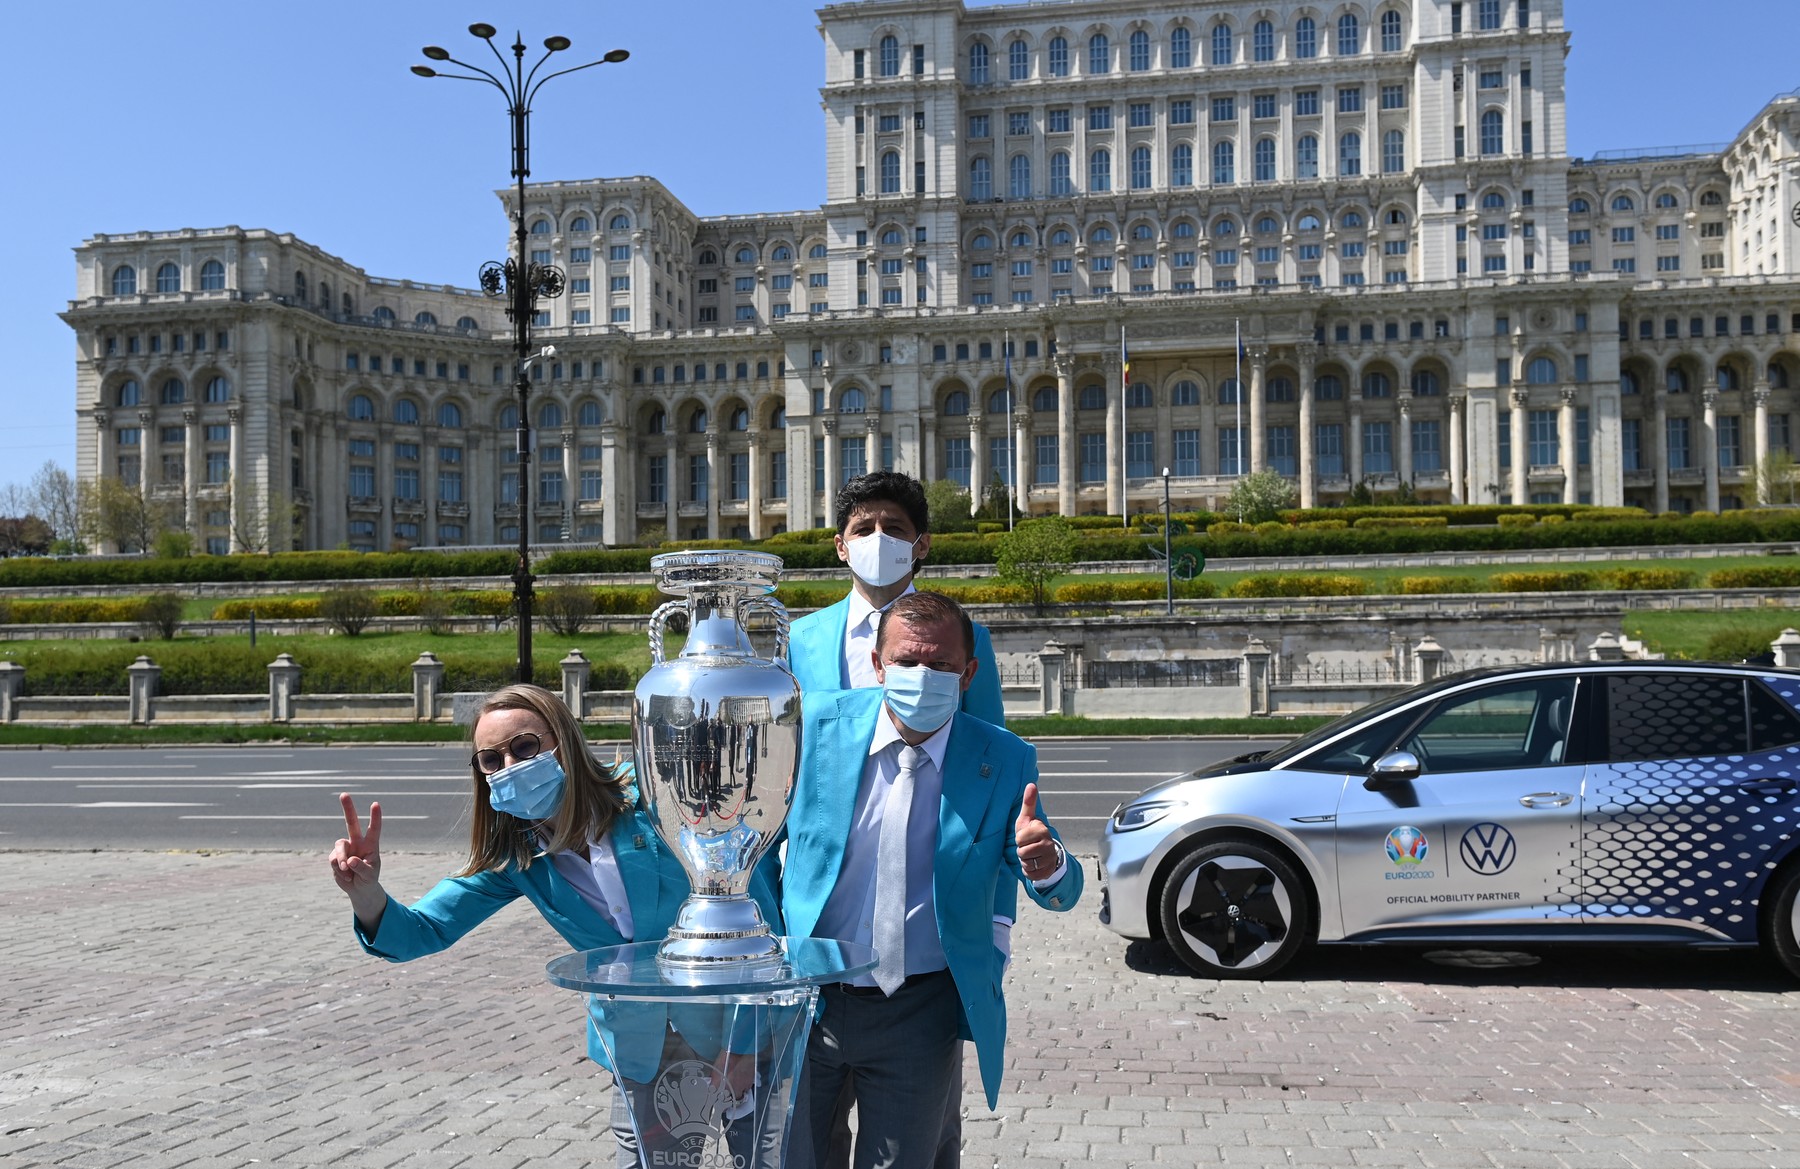 Former Romanian athlete Gabriela Szabo (L), former Romanian football player Miodrag Belodedici (C) and former Romanian football player Dorinel Munteanu (R) pose in front of the Parliament palace next to the Henri Delaunay trophy of the UEFA Euro 2020 football competition during its presentation tour in Bucharest, April 25, 2021. Held over from 2020 due to the pandemic, the European Championship will now be held in 11 different countries from June 11-July 11, 2021.,Image: 607812874, License: Rights-managed, Restrictions: , Model Release: no, Credit line: Profimedia